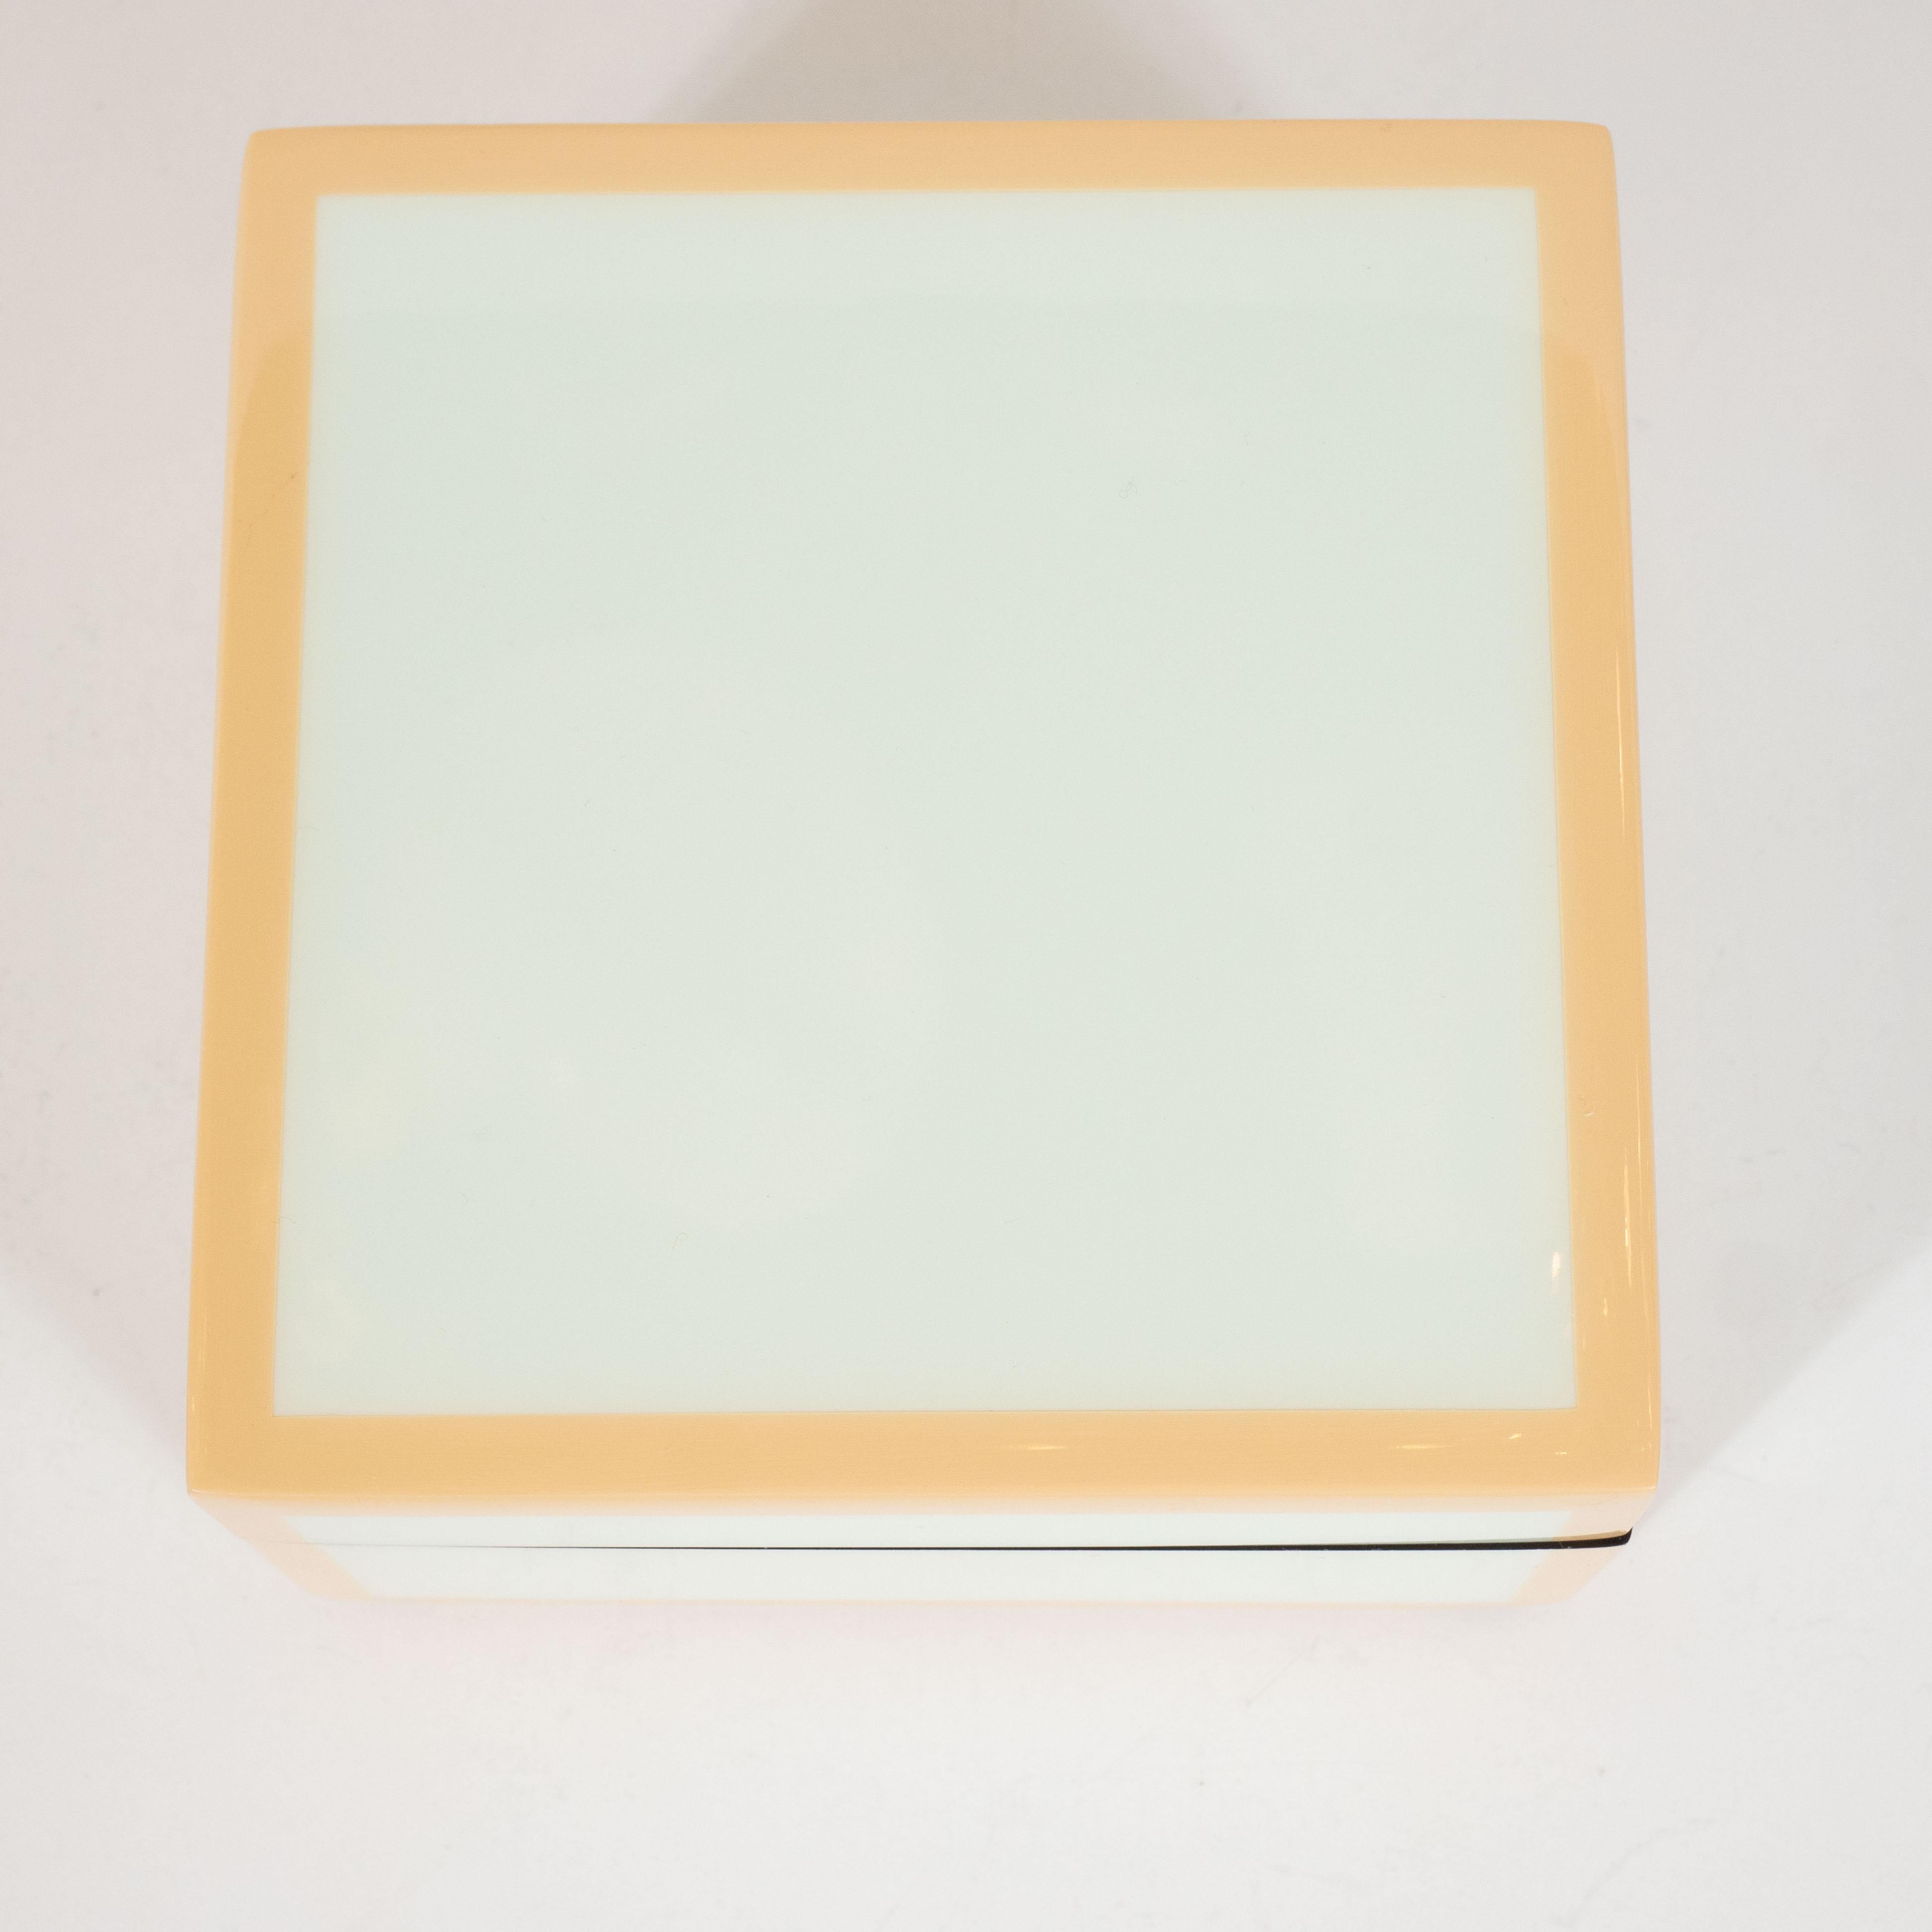 20th Century Modernist Square Lacquered Square Box in Pale Celadon with Tan Accents